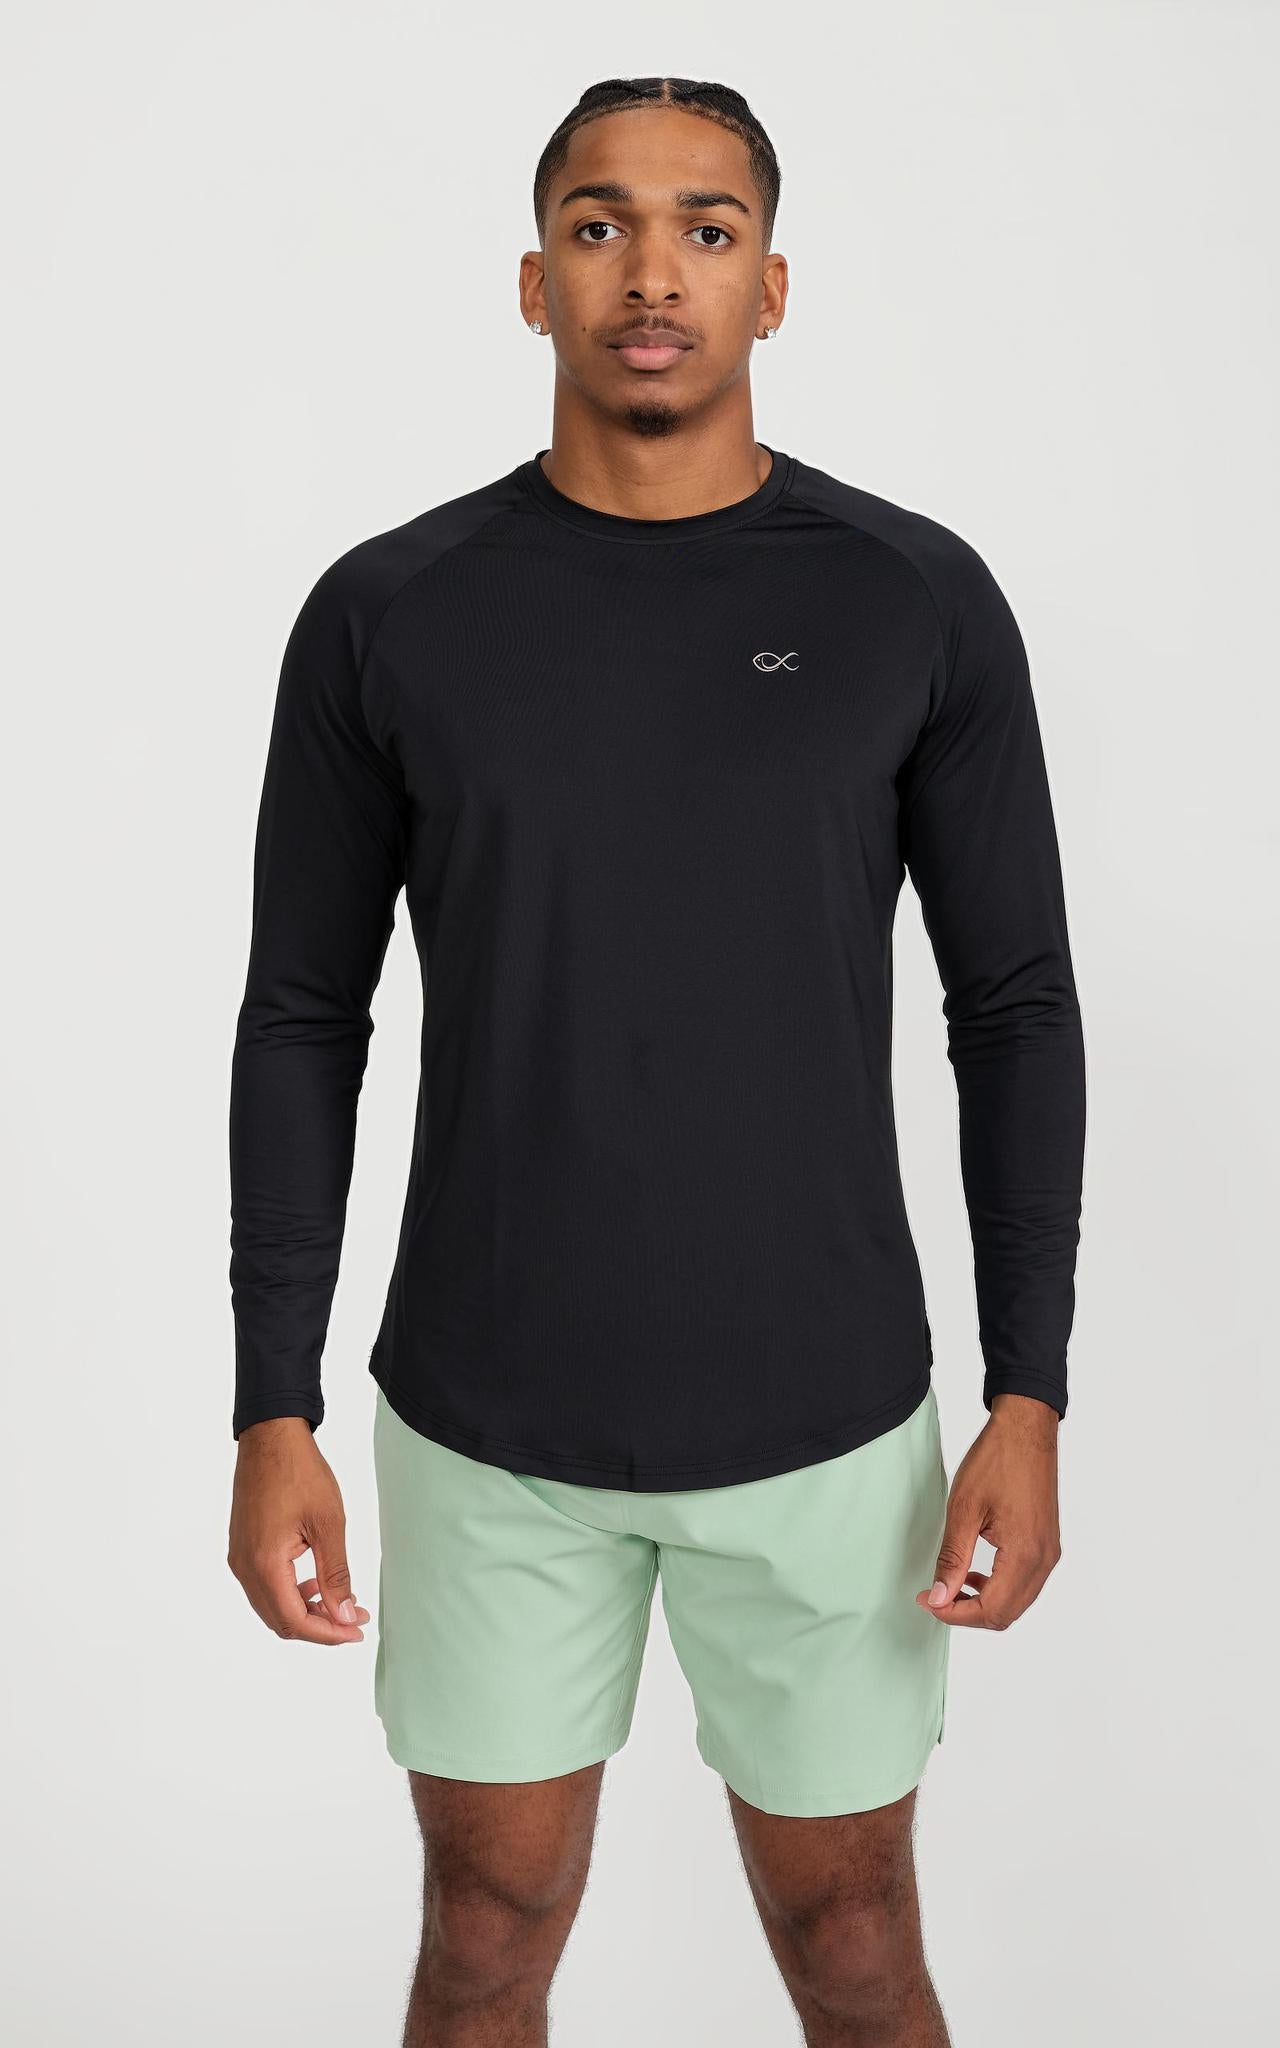 Long Sleeve Performance Cooling Shirt UPF 50 in Black